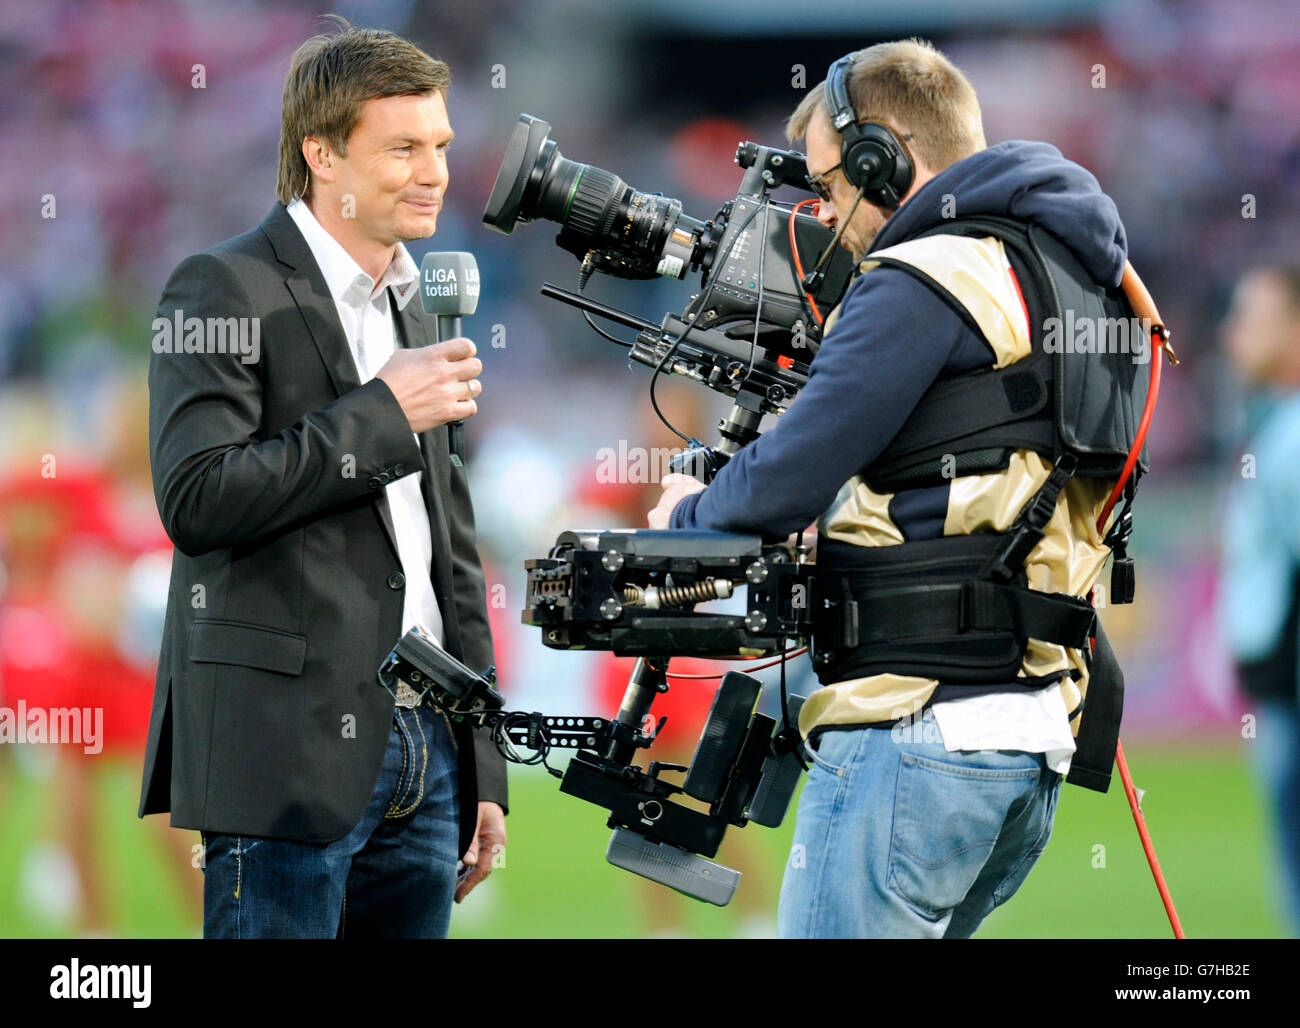 Thomas Helmer, host of 'Sport 1', in front of the camera, Bundesliga, federal league, 1. FC Koeln - Hannover 96 2:0 Stock Photo